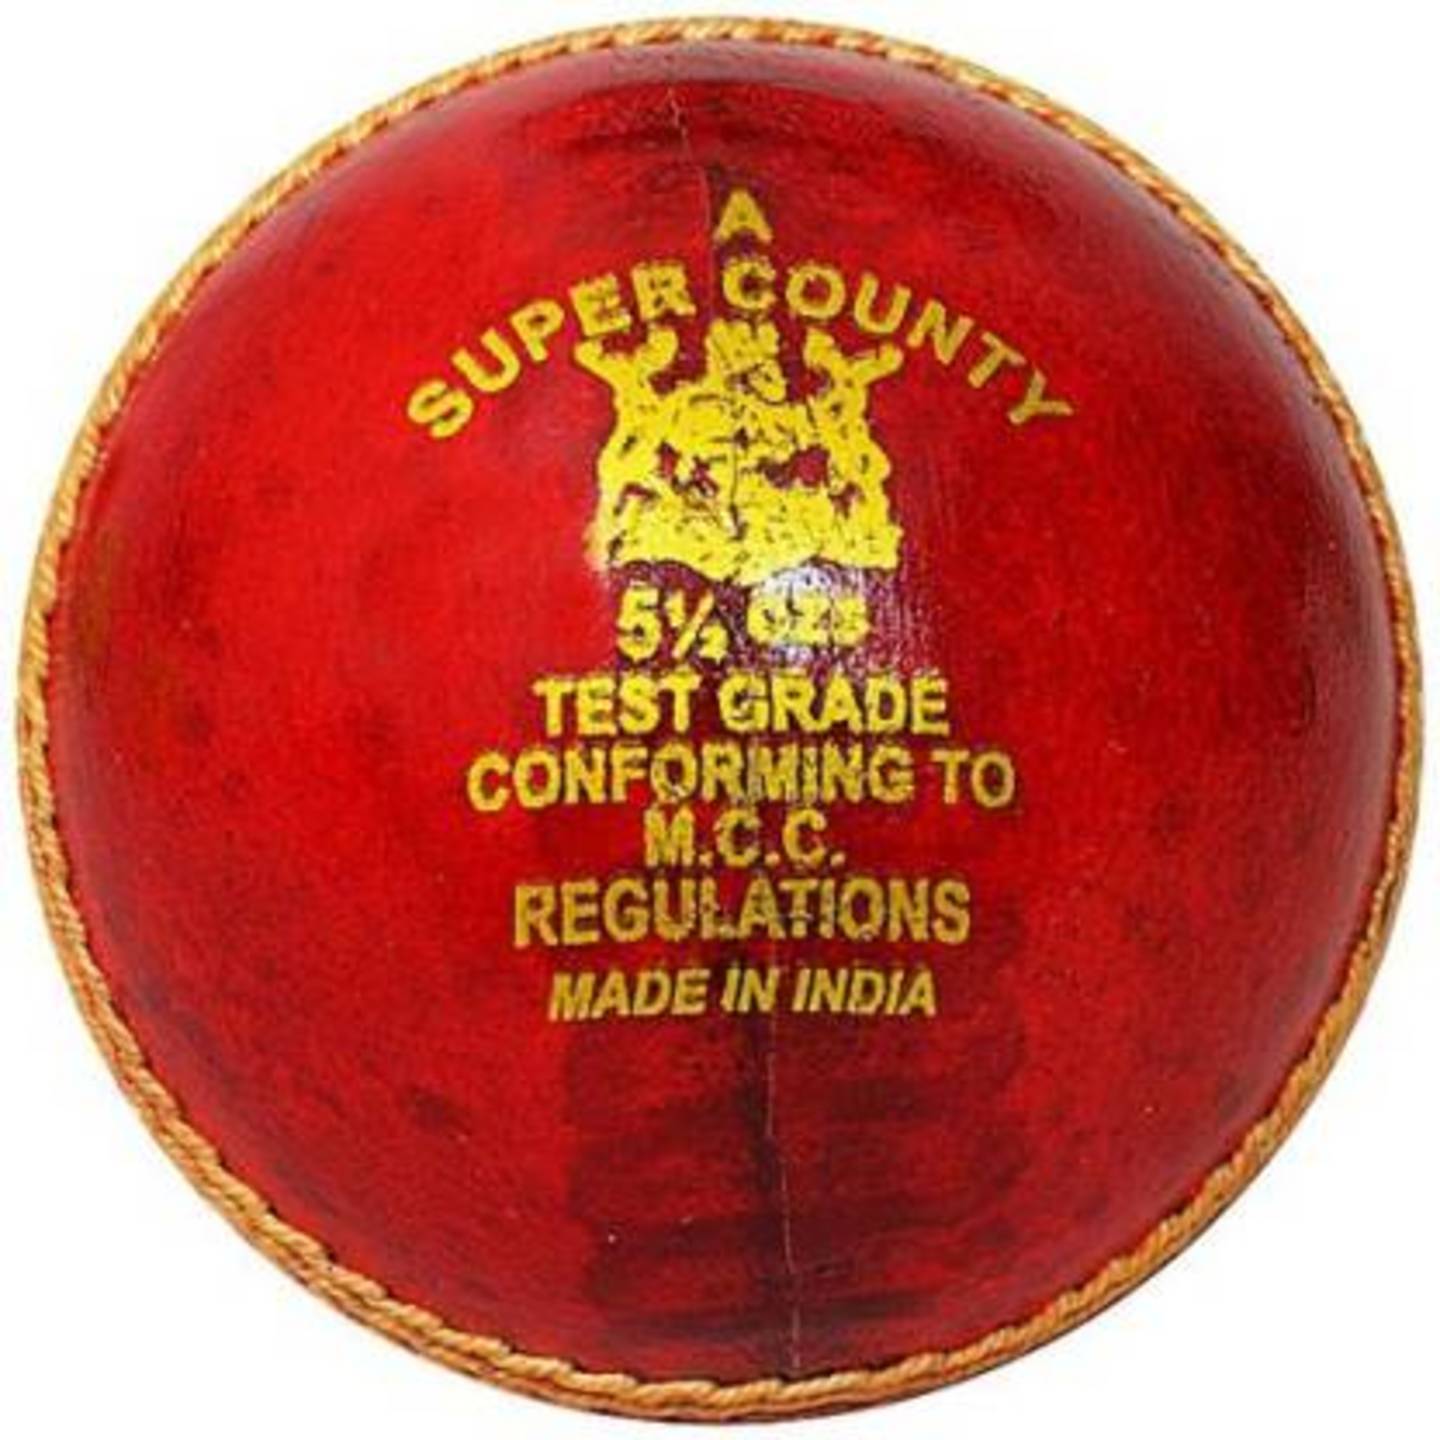 GM SUPER COUNTY  RED LEATHER CRICKET BALL